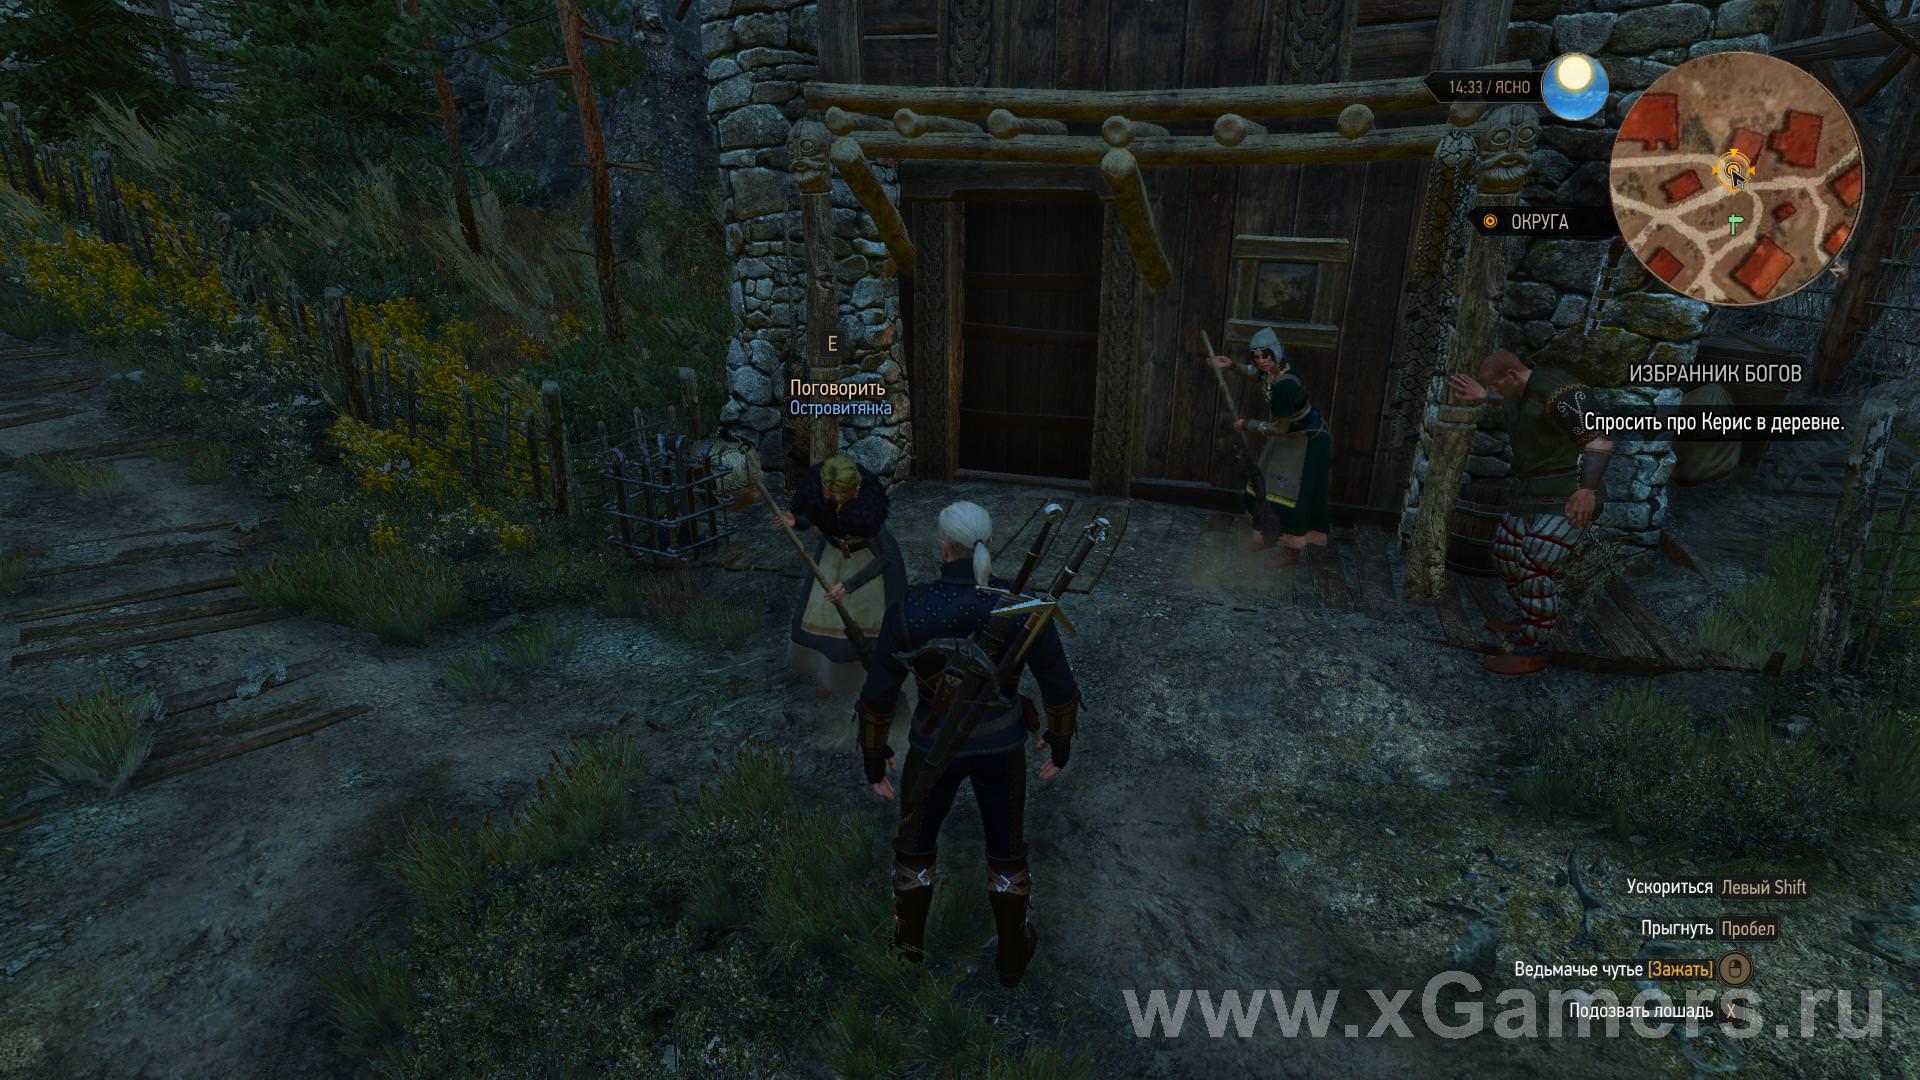 We are looking for Keris in the game The Witcher 3